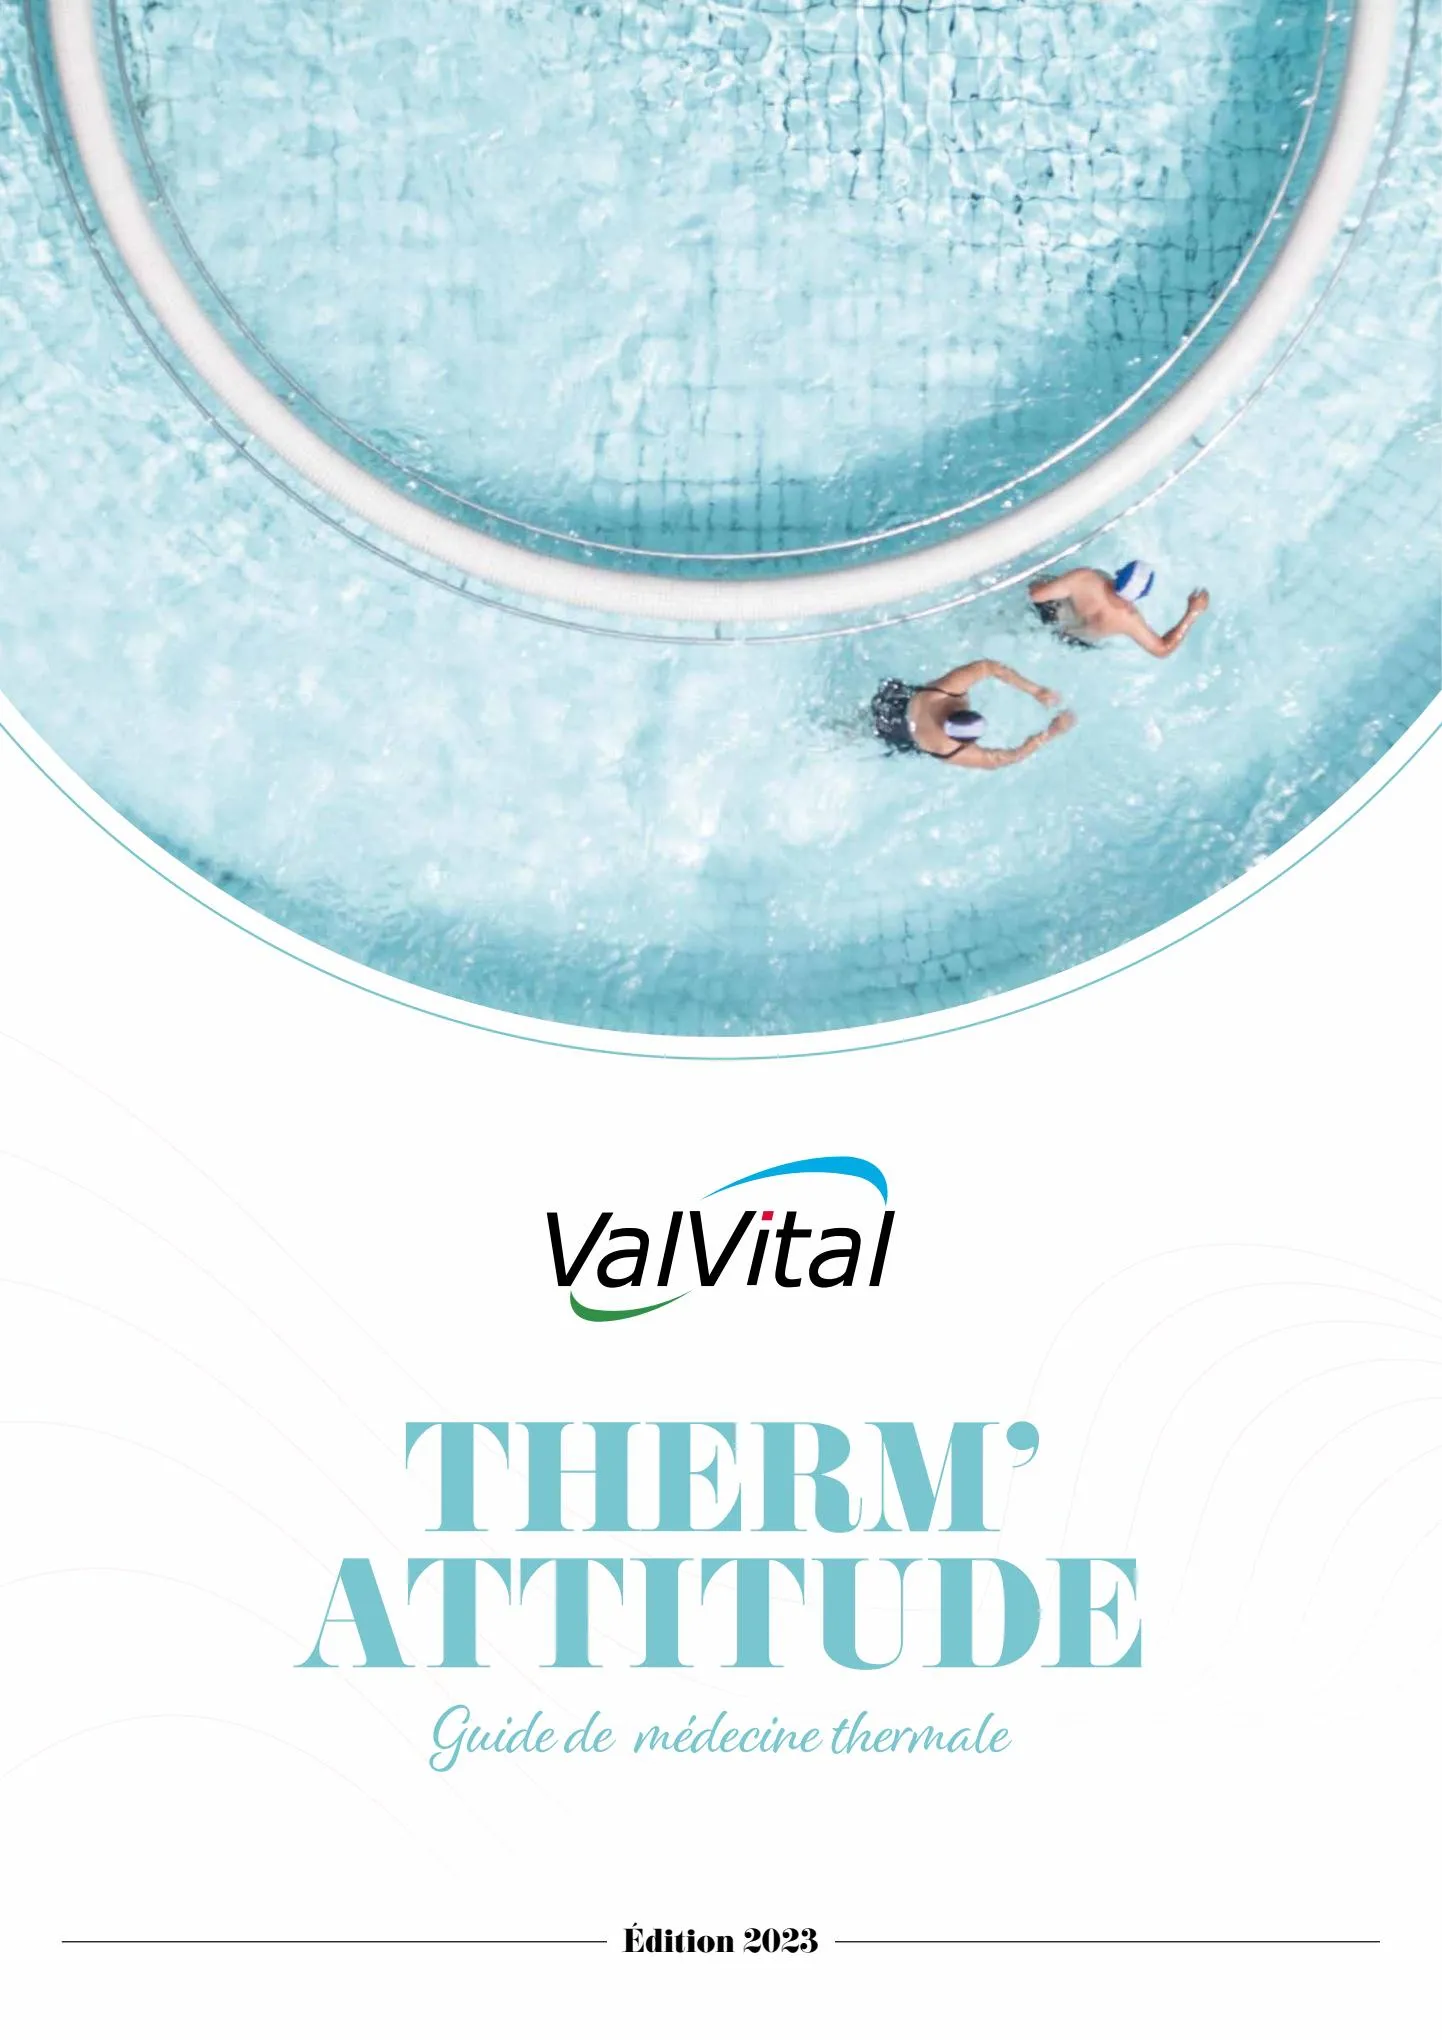 Catalogue CURE Therm'attitude ValVital 2023, page 00001